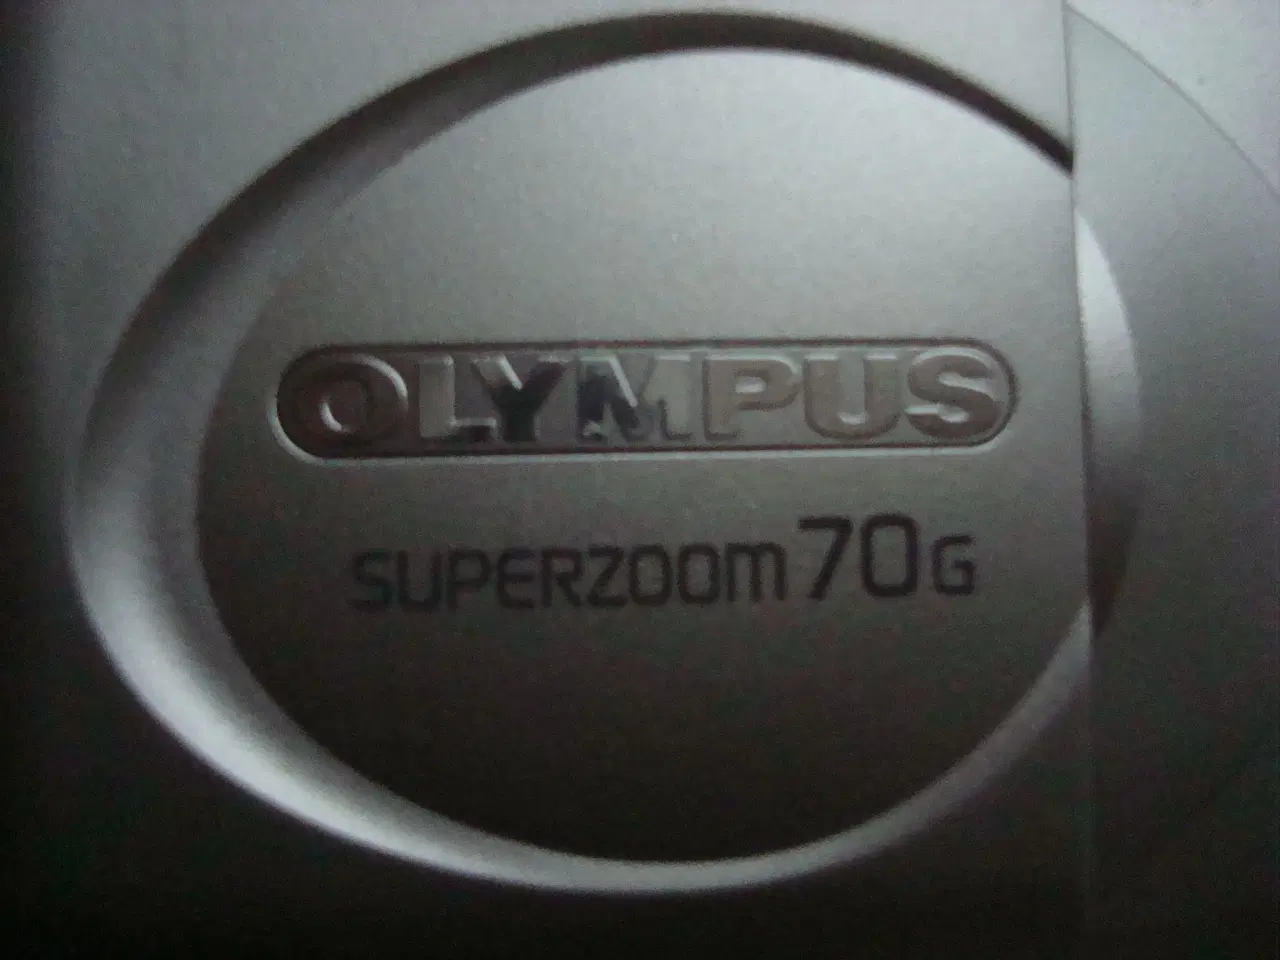 Billede 6 - Point and  shoot Olympus Superzoom 70g